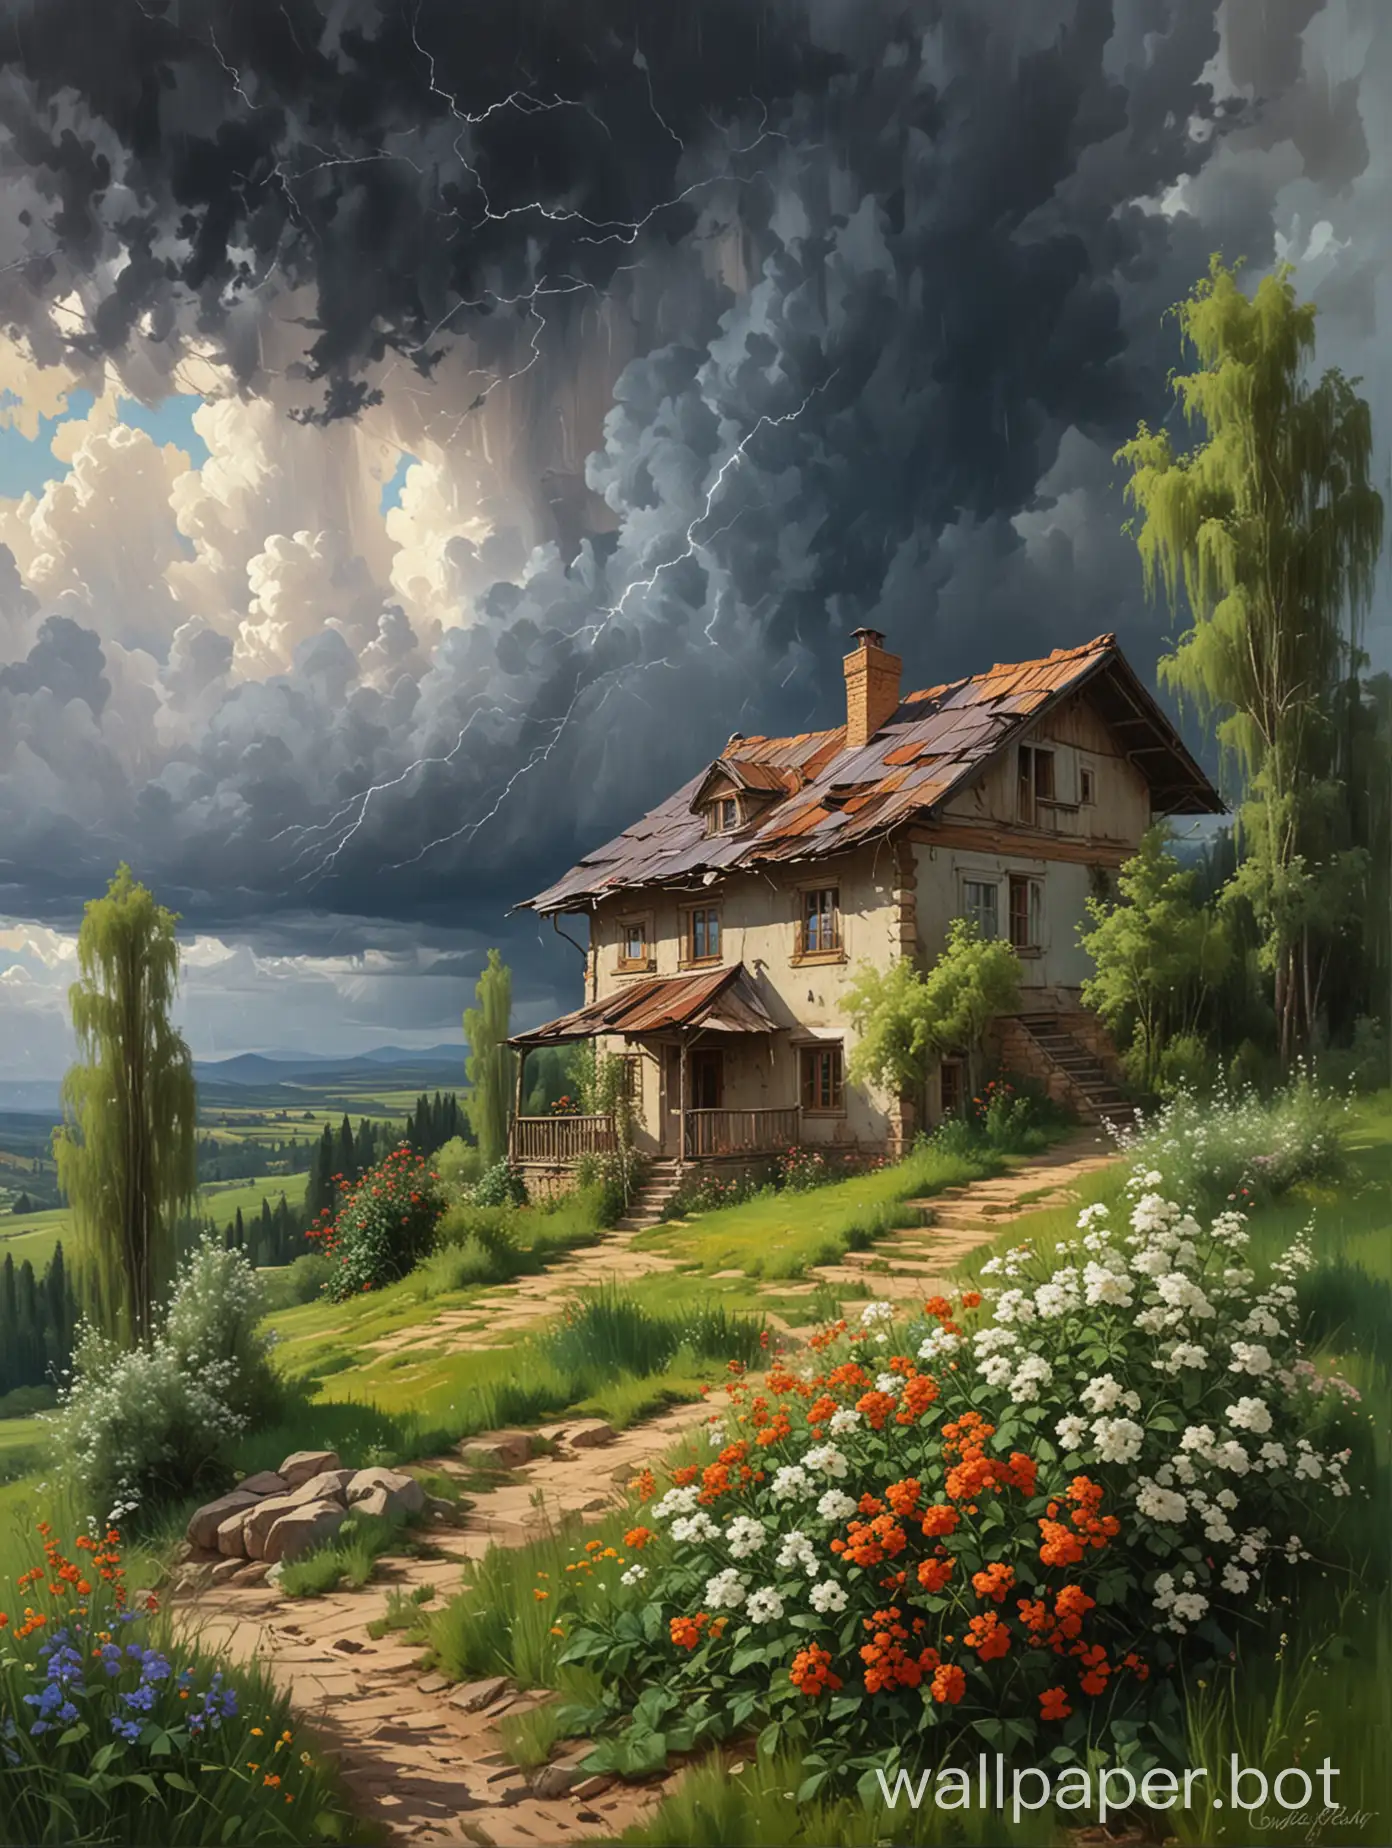 Vladimir gusev Oil painting of dark clouds with lightninigs and One old  house in a natural view trees with flowers